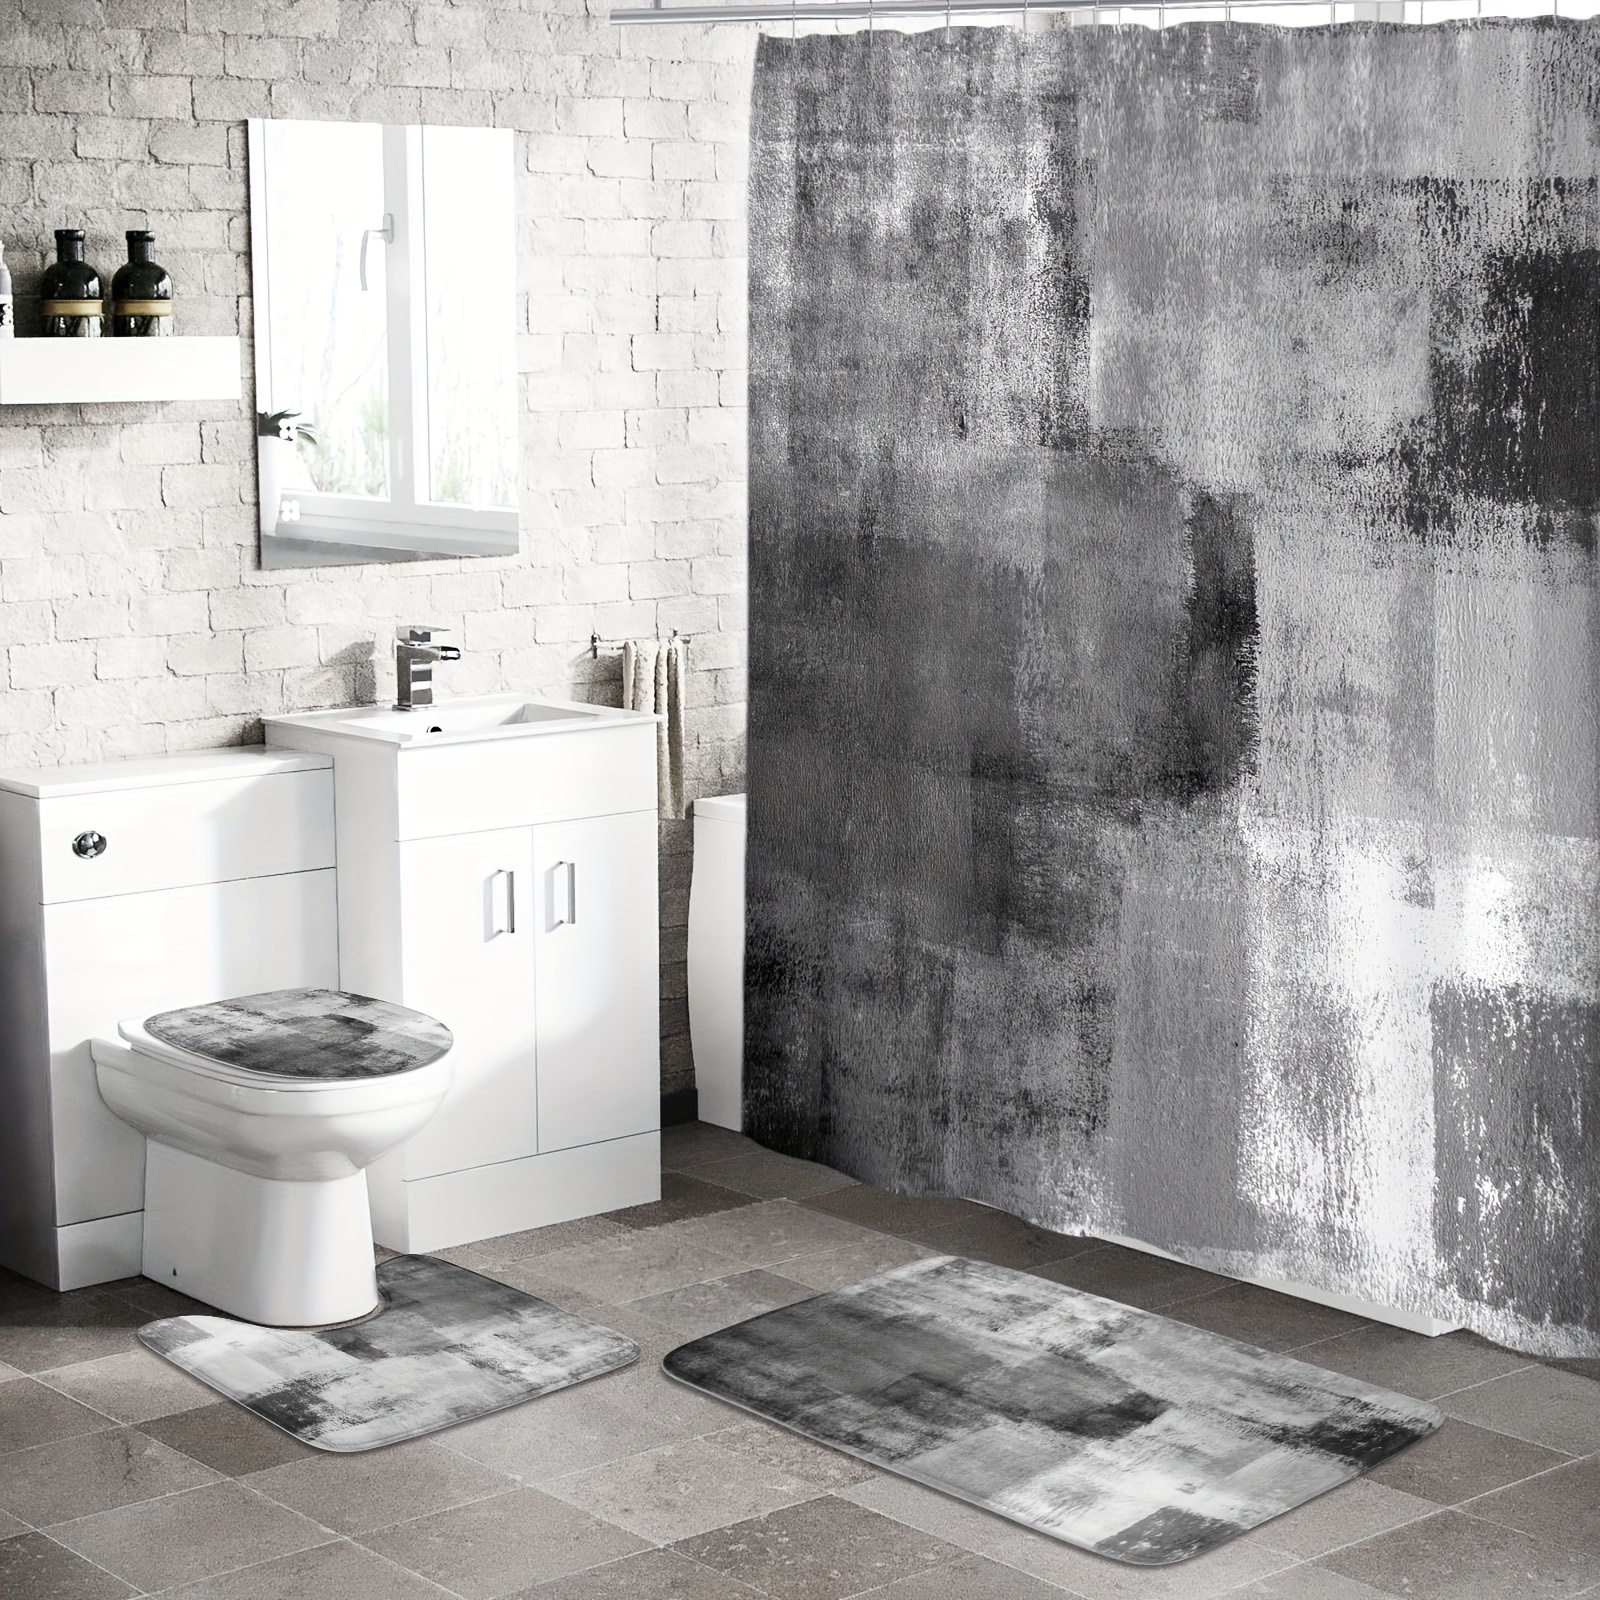 

4pcs Ombre Shower Curtain Sets With Rugs For Bathroom Decor, Abstract Grey Bathroom Sets With Shower Curtain And Rugs And Accessories, Rustic Grunge Bathroom Curtain Set With Mats